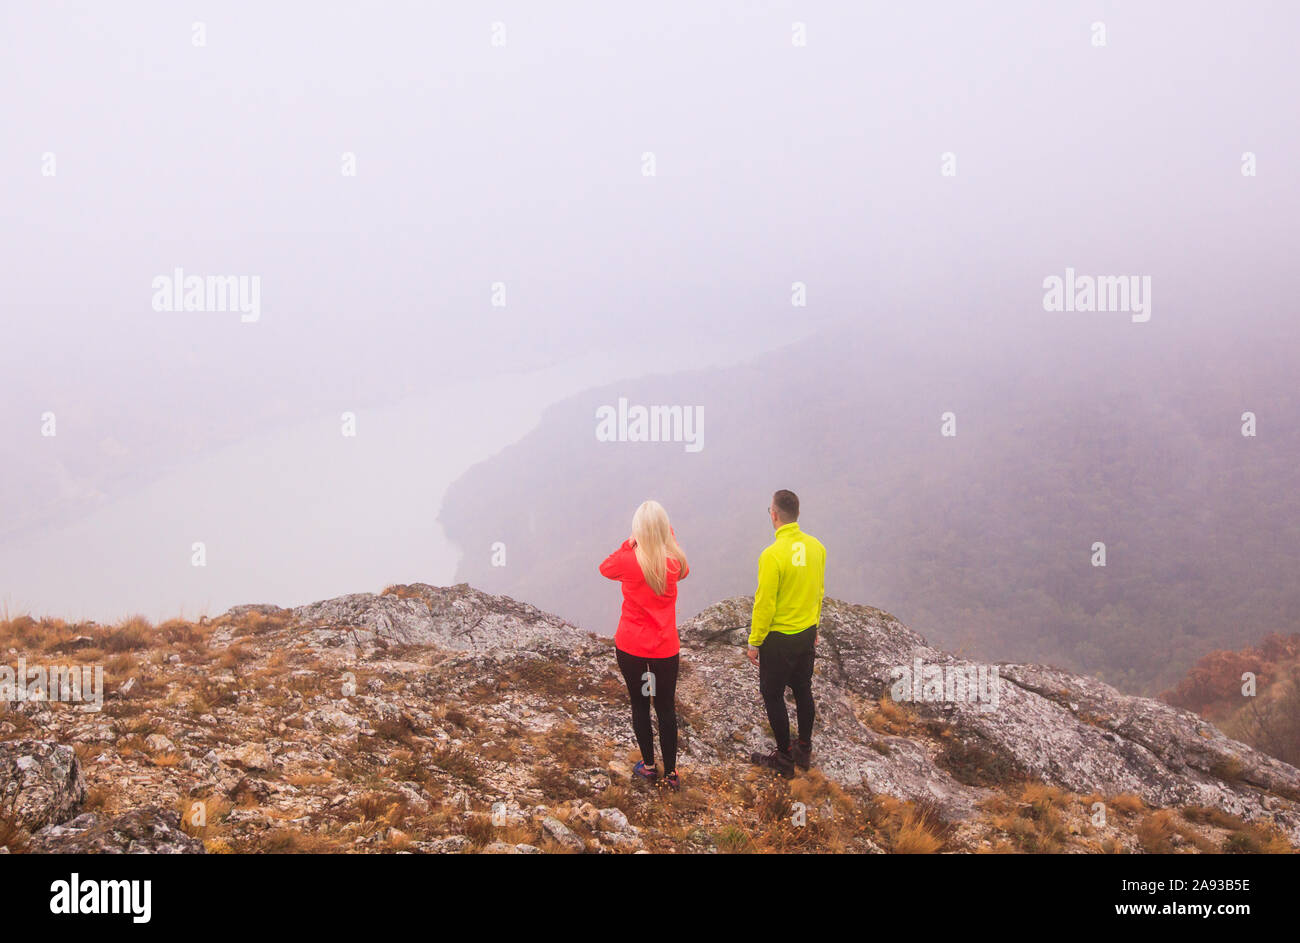 Healthy active lifestyle. Hiking. Beautiful nature landscape. View on misty Danube river from peaks. Location travel Serbia. Stock Photo